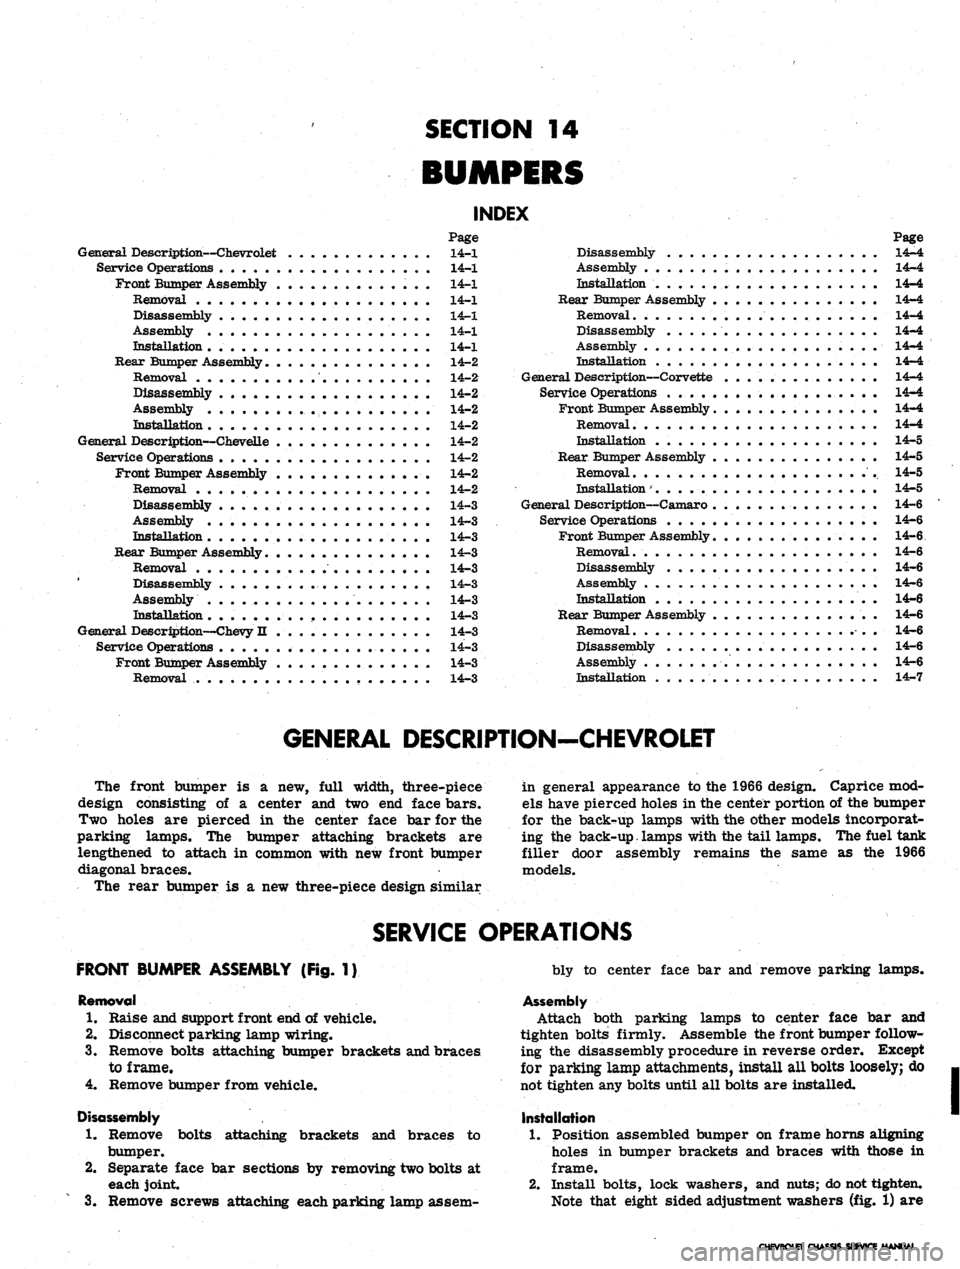 CHEVROLET CAMARO 1967 1.G Chassis Workshop Manual 
SECTION 14

INDEX

Page

General Description—Chevrolet 14-1

Service Operations 14-1

Front Bumper Assembly 14-1

Removal 14-1

Disassembly . 14-1

Assembly „ 14-1

Installation . . 14-1

Bear Bu